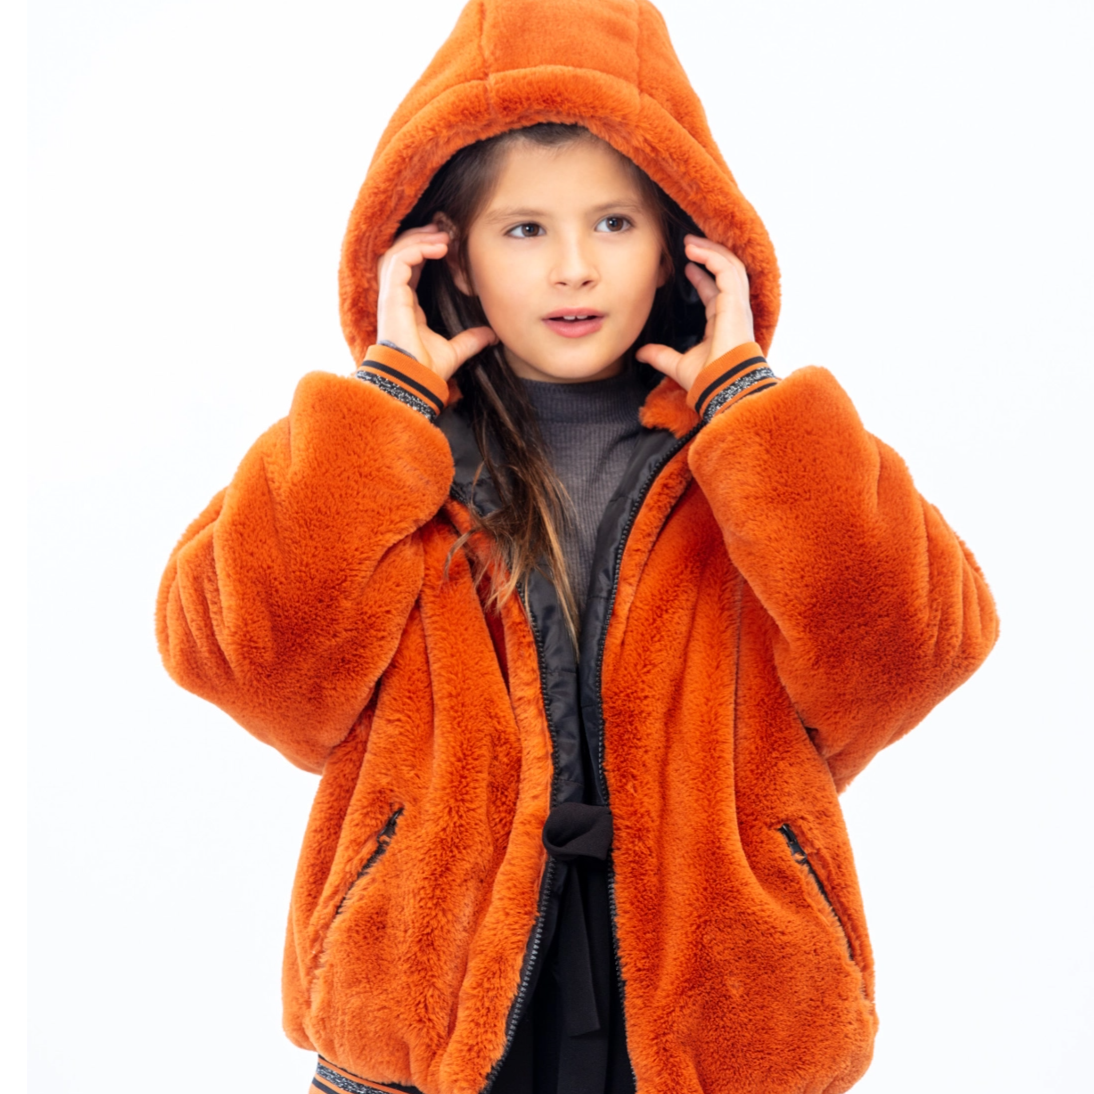 kid standing up looking away from camera, wearing an orange jacket with her hands over her ears